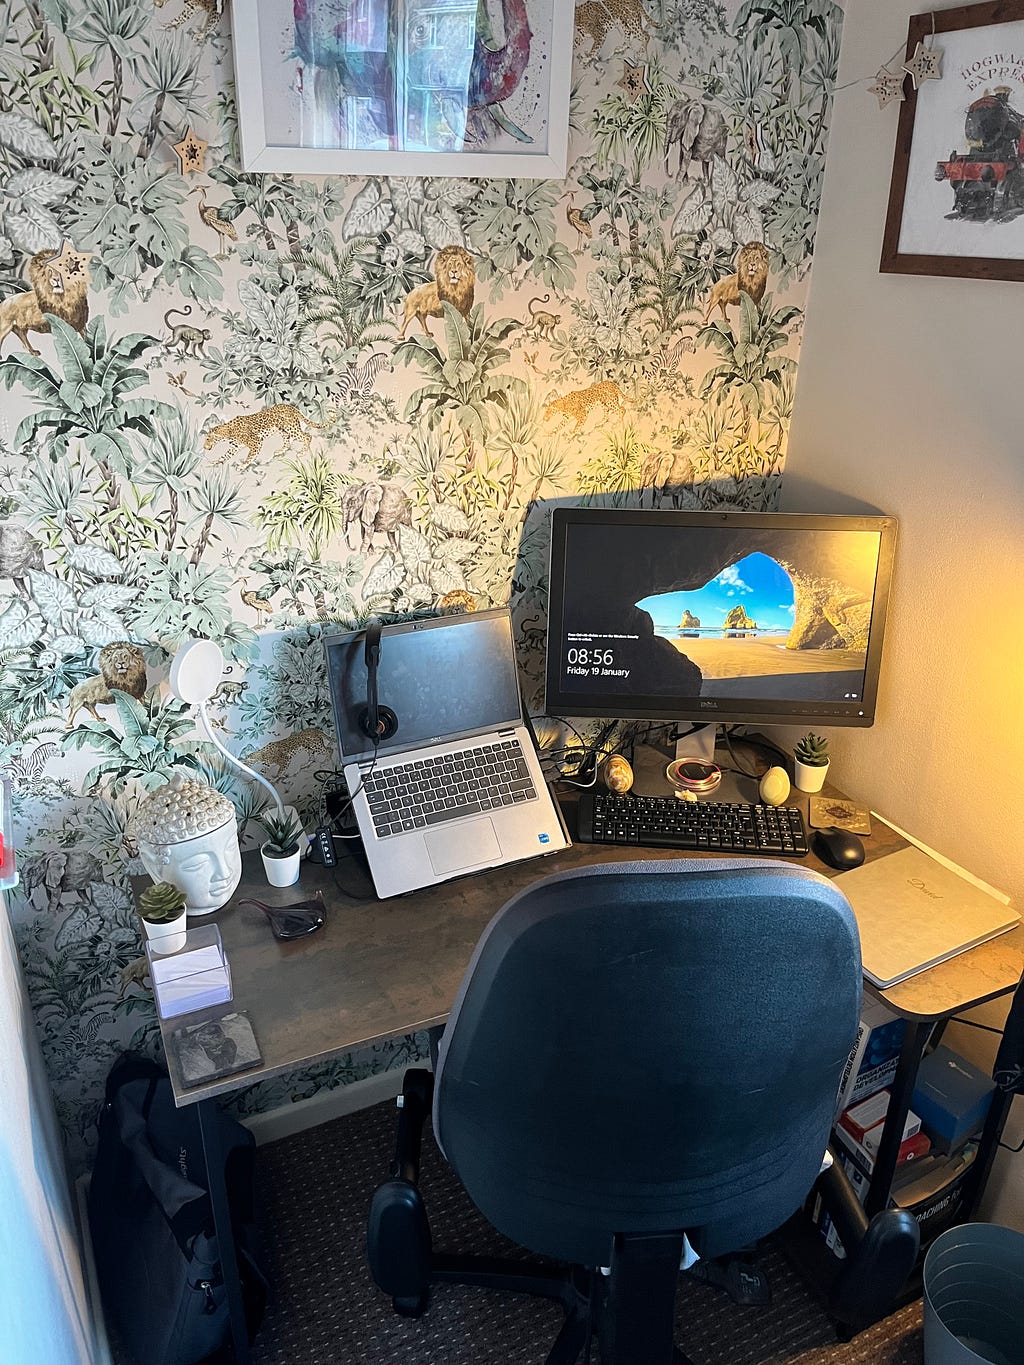 A desk with a laptop and monitor set up.